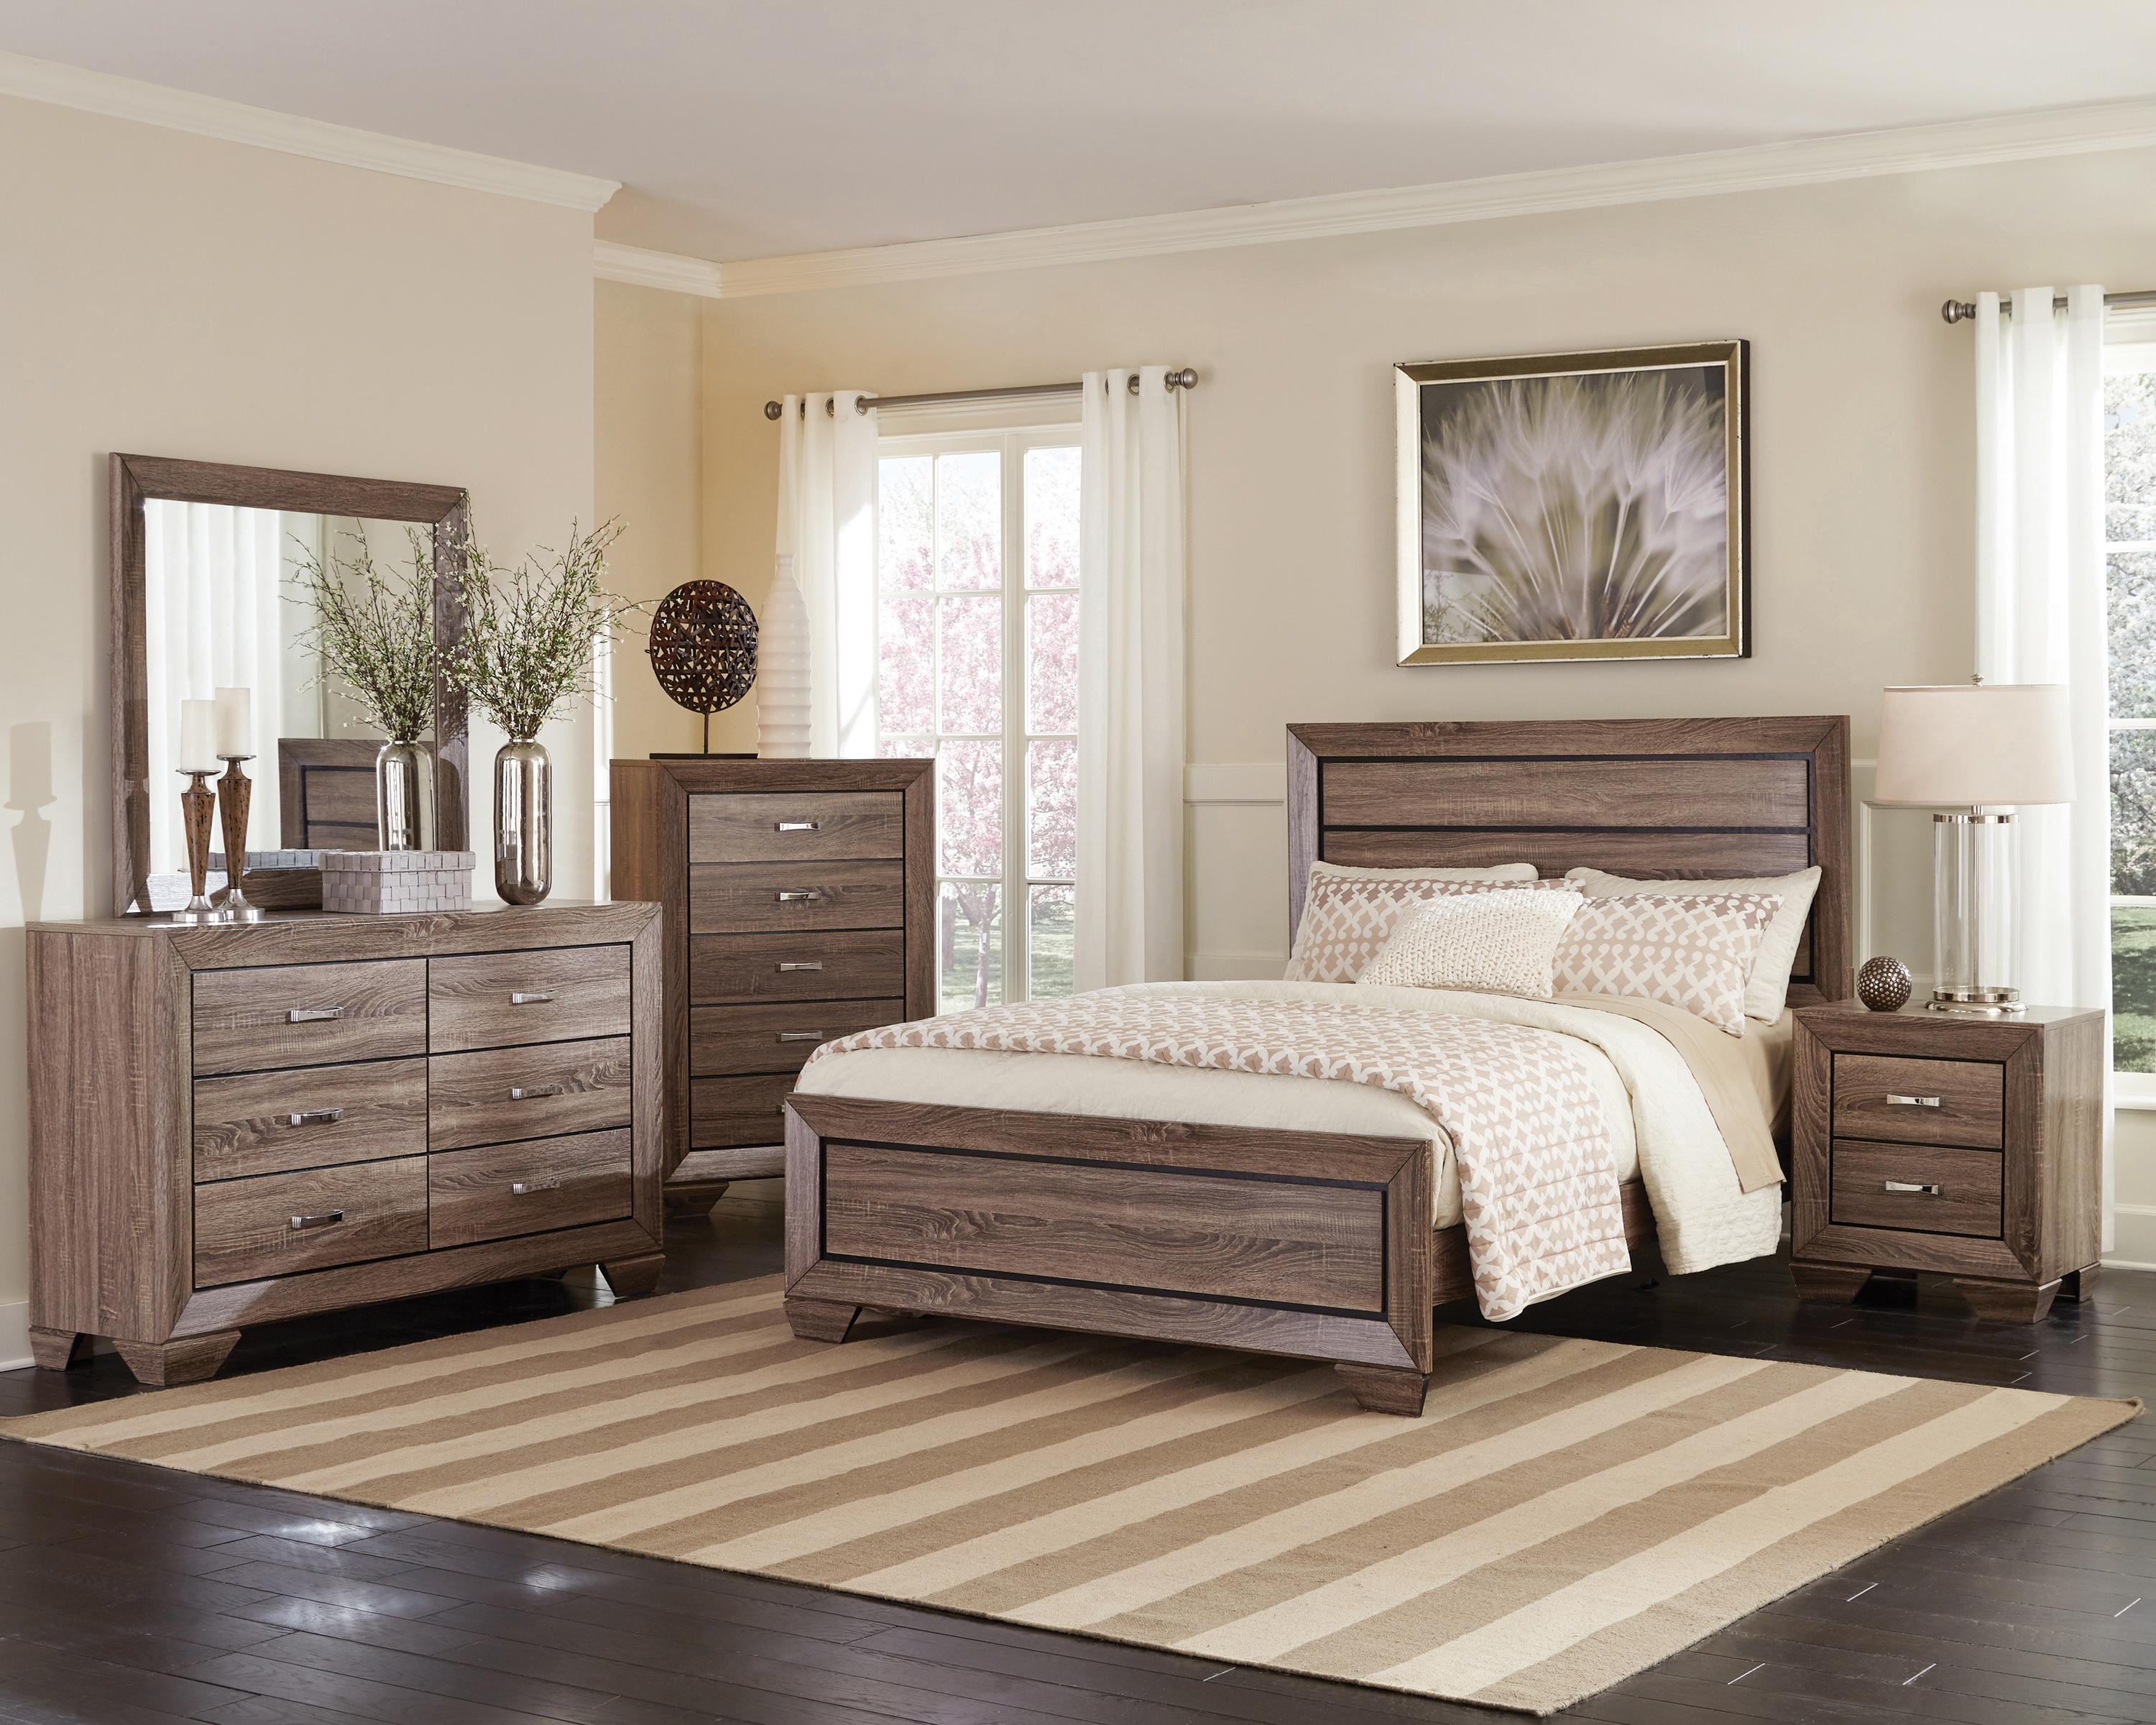 Transitional Bedroom Set 204191Q-6PC Kauffman 204191Q-6PC in Taupe 